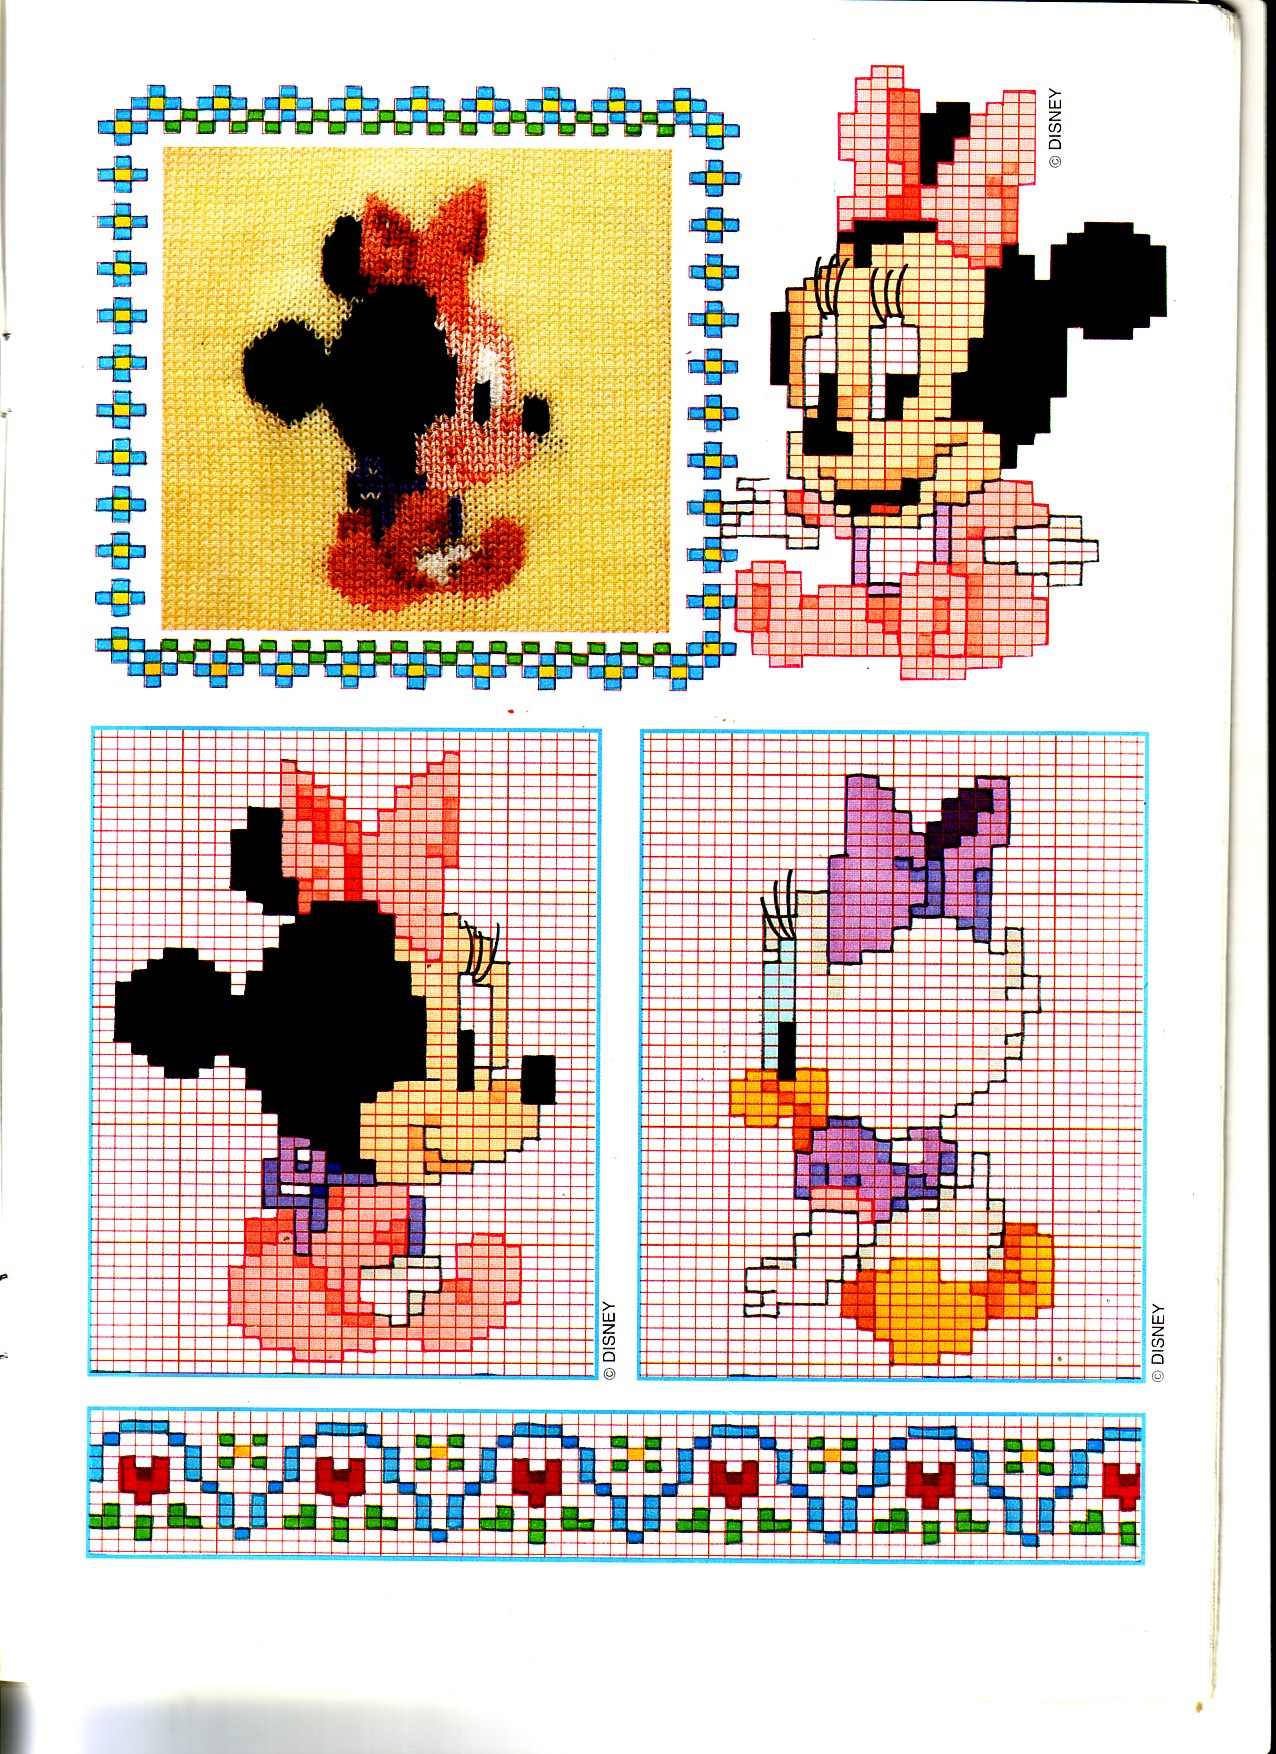 Cross stitch border with baby Minnie and baby Daisy Duck